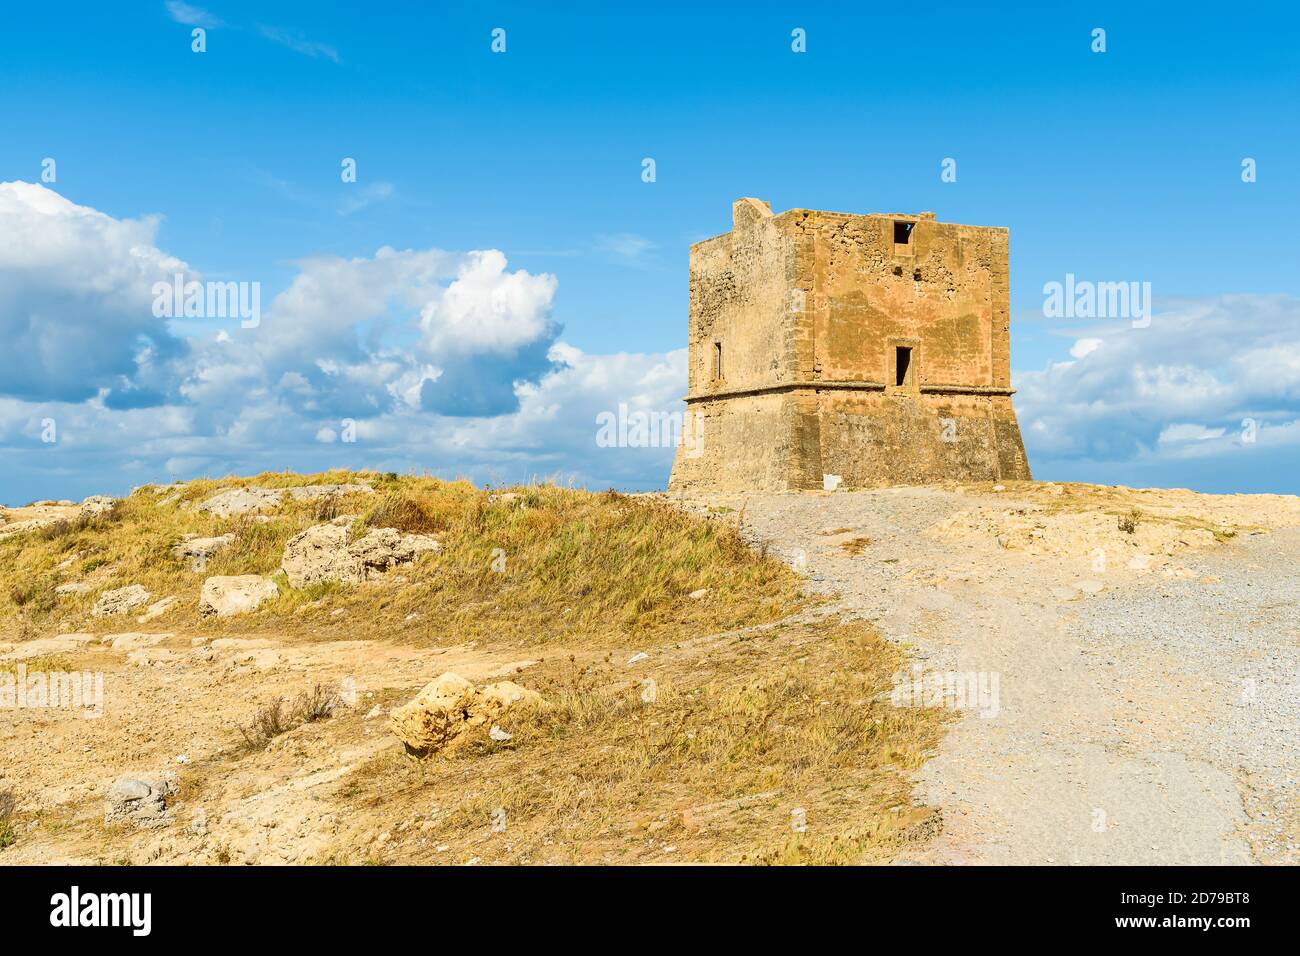 View of Ancient Tower Mulinazzo, located inside the Falcone e Borsellino Airport of Punta Raisi in the province of Palermo, Cinisi, Italy Stock Photo